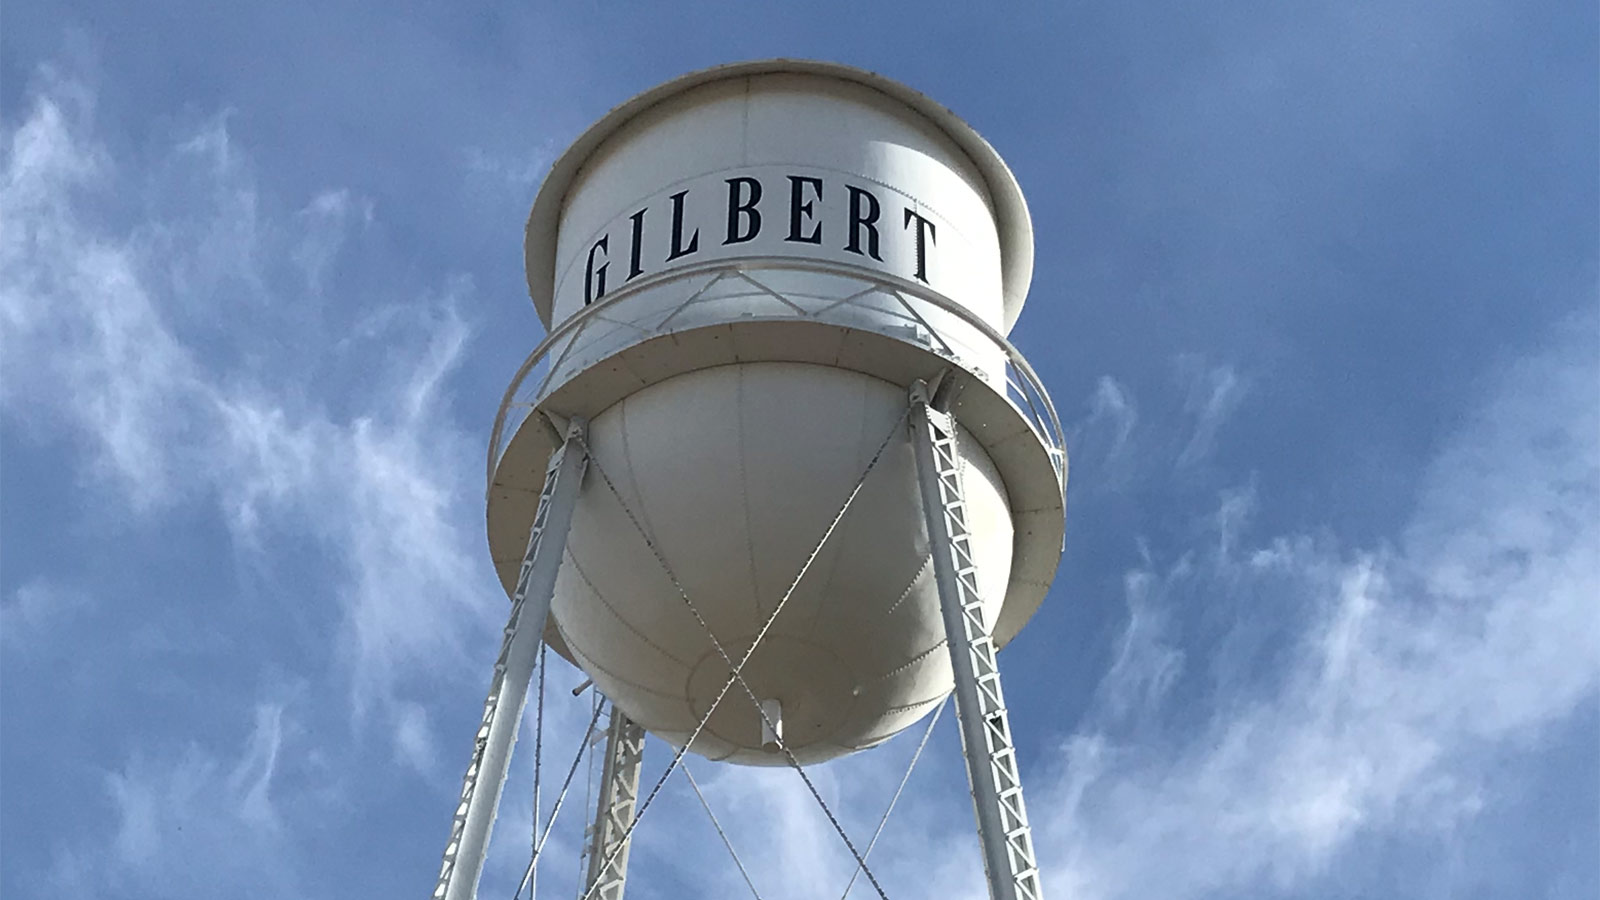 Gilbert utility rates to start rising in April, with water and trash bills doubling by 2026